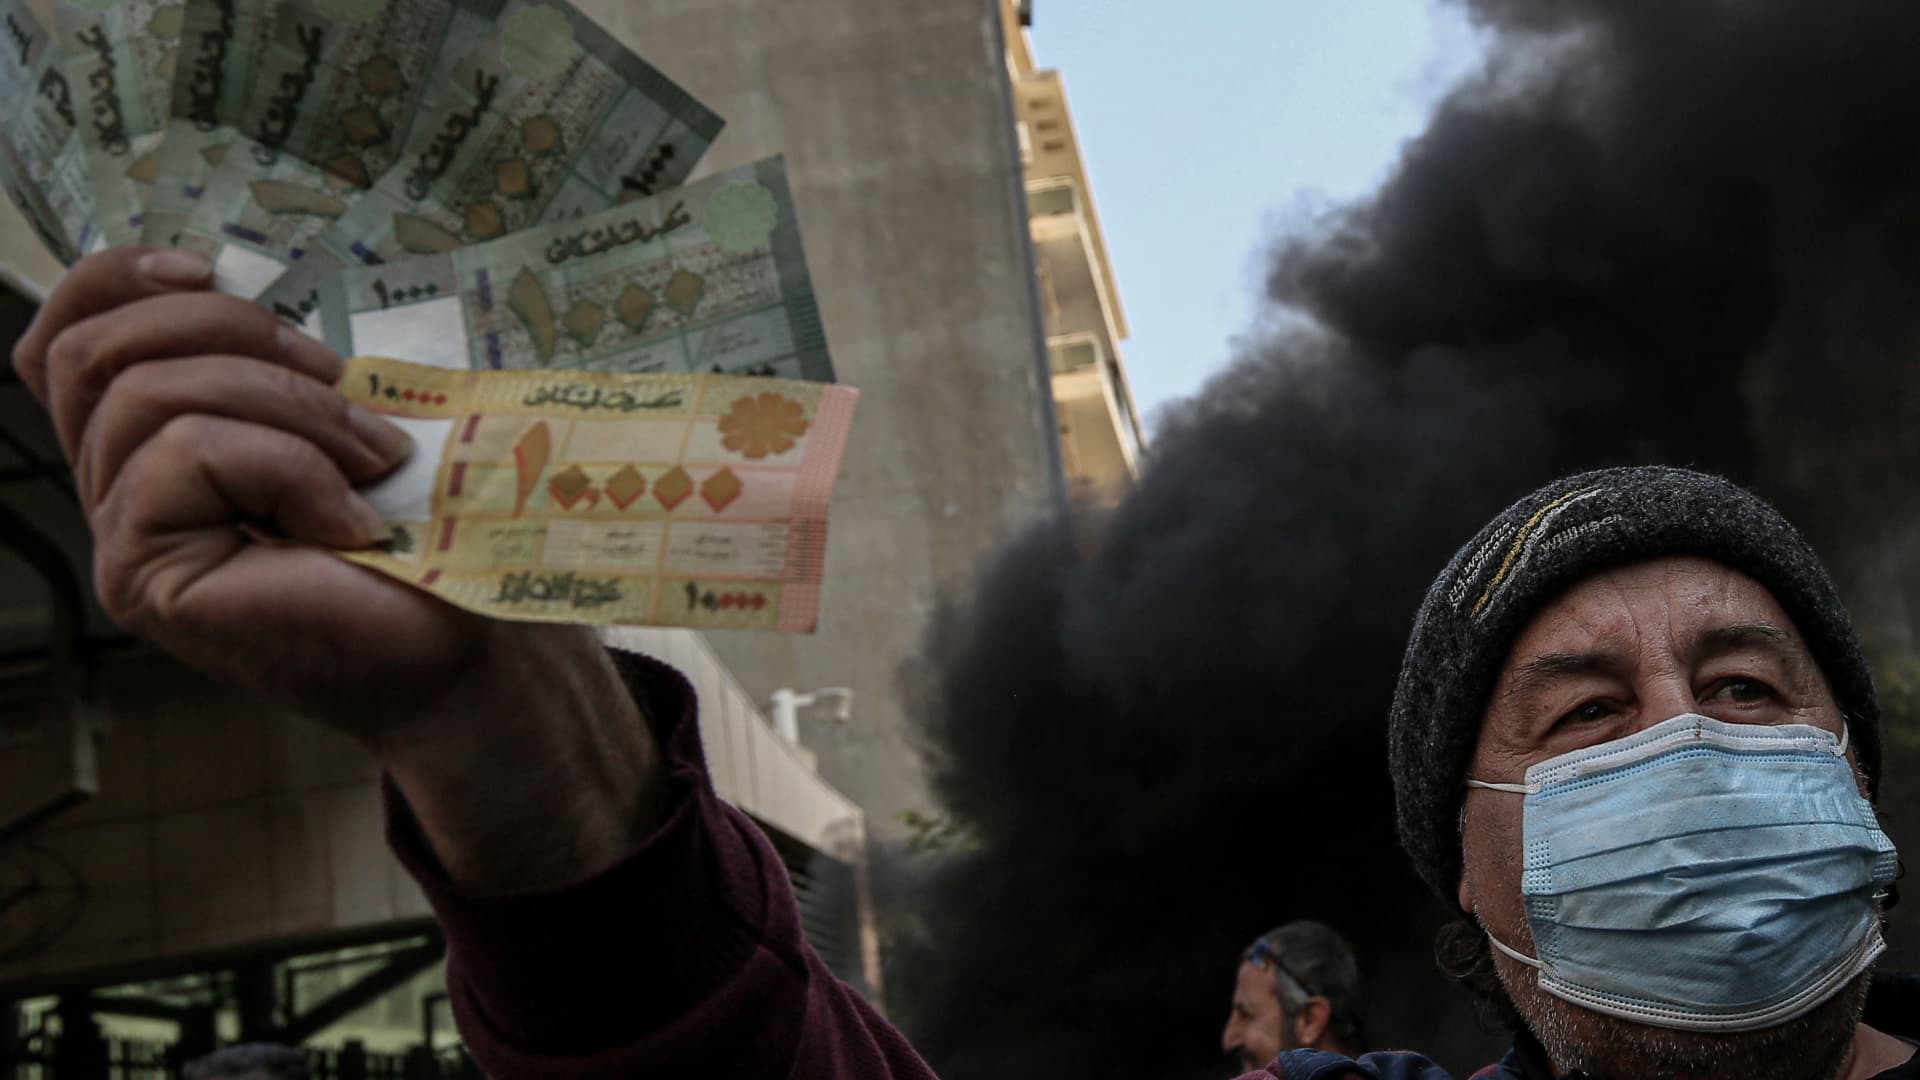 An anti-government Lebanese activist displays Lebanese bills during a protest outside the country's central bank against the continuing downward spiral of the Lebanese pound against the dollar and Riad Salameh's arrest, under investigation by five European countries.